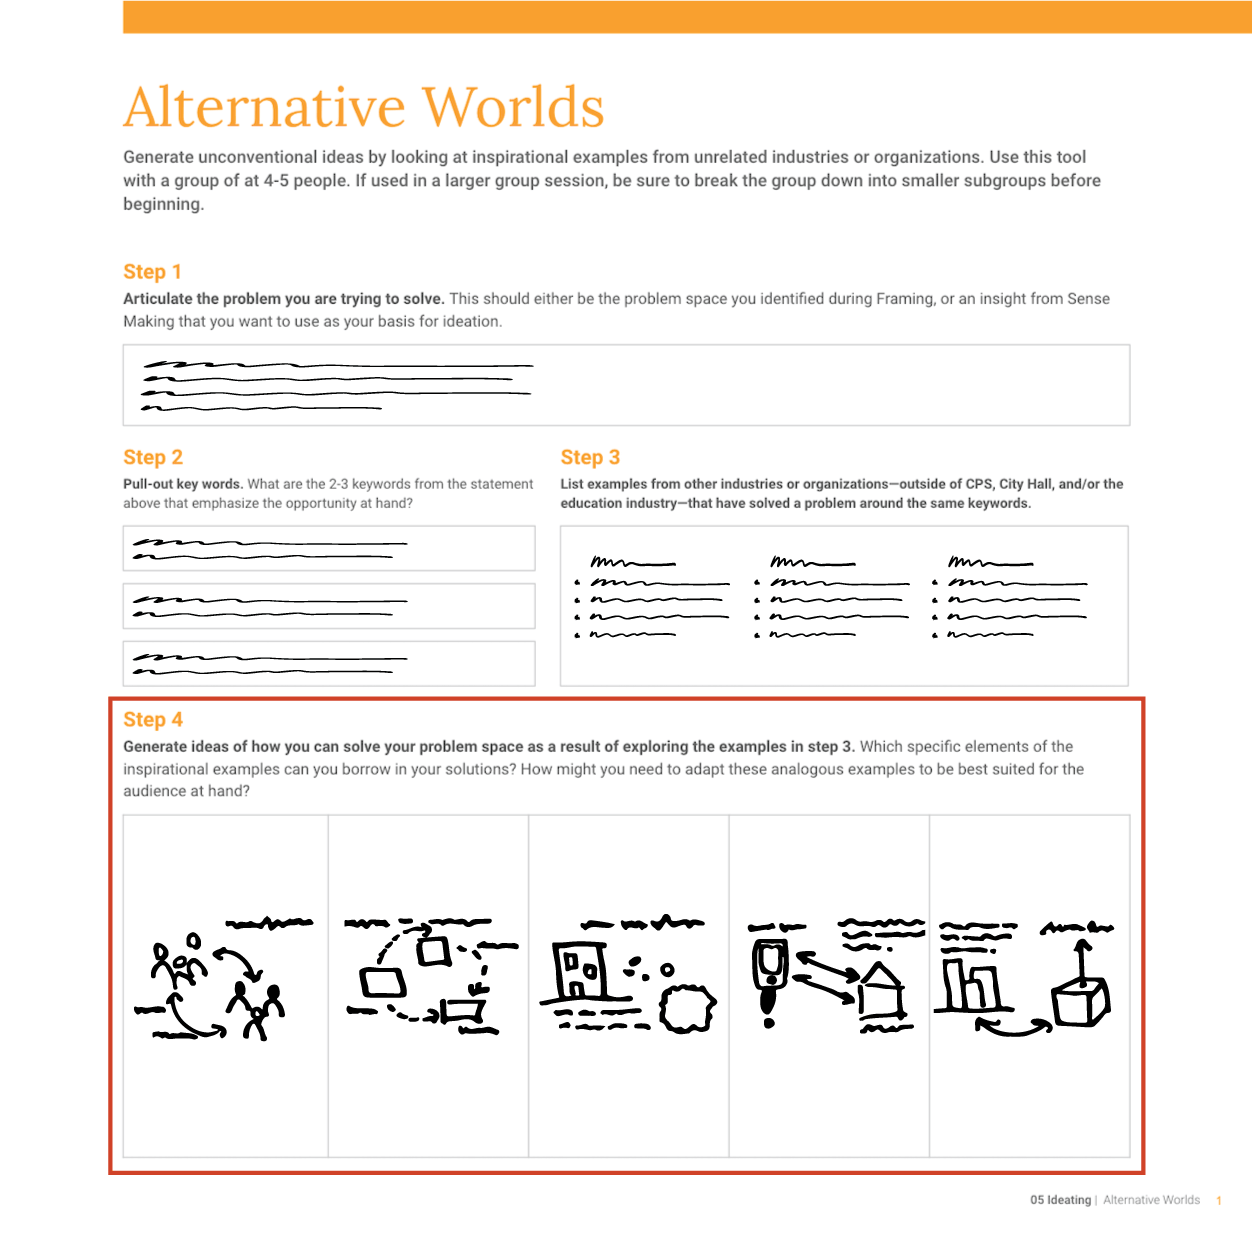 image of Alternative-Worlds worksheet with step 4 filled out